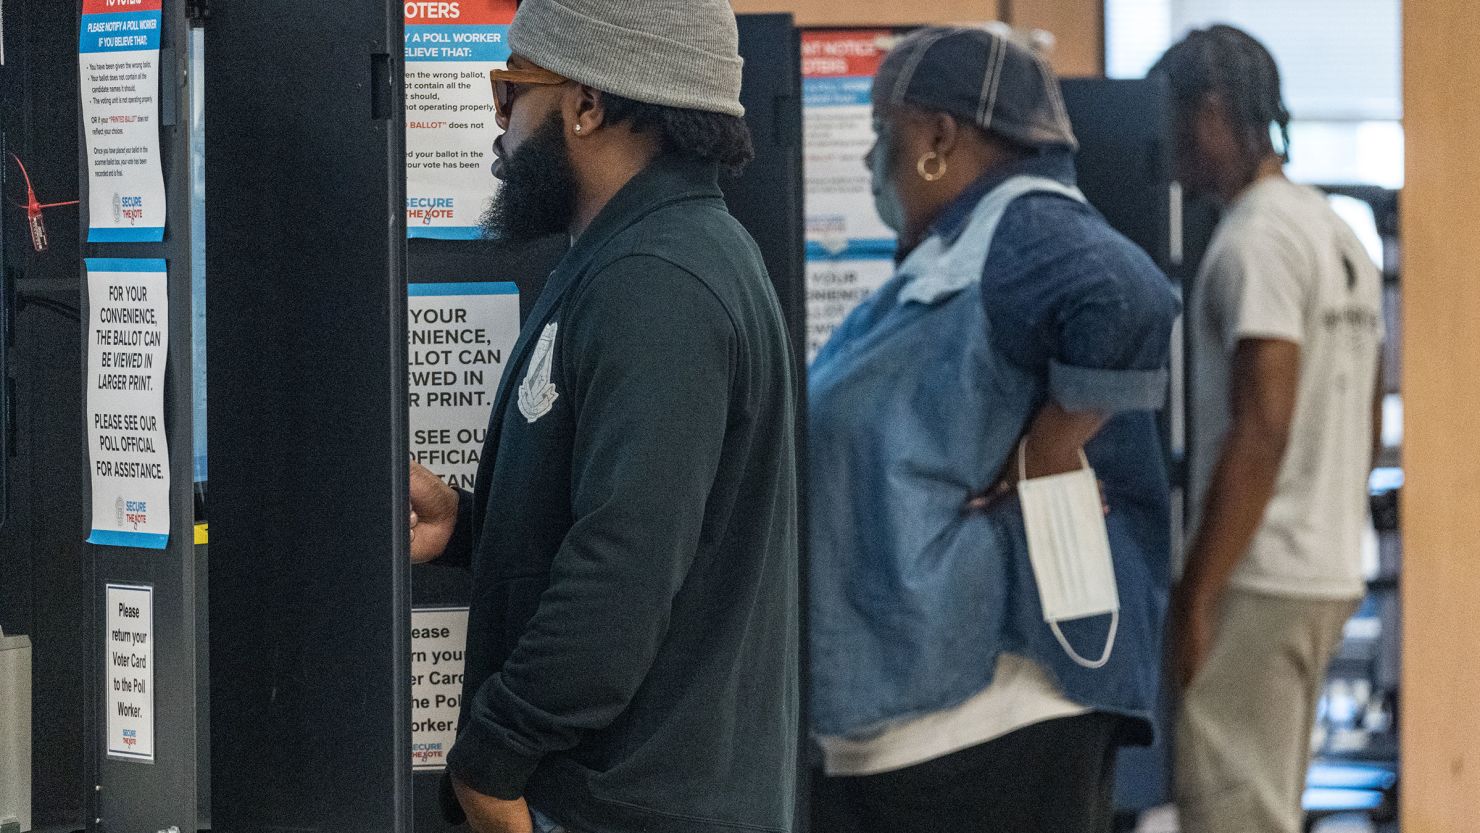 Community members arrive to vote at their local polling location in Atlanta on November 8, 2022.